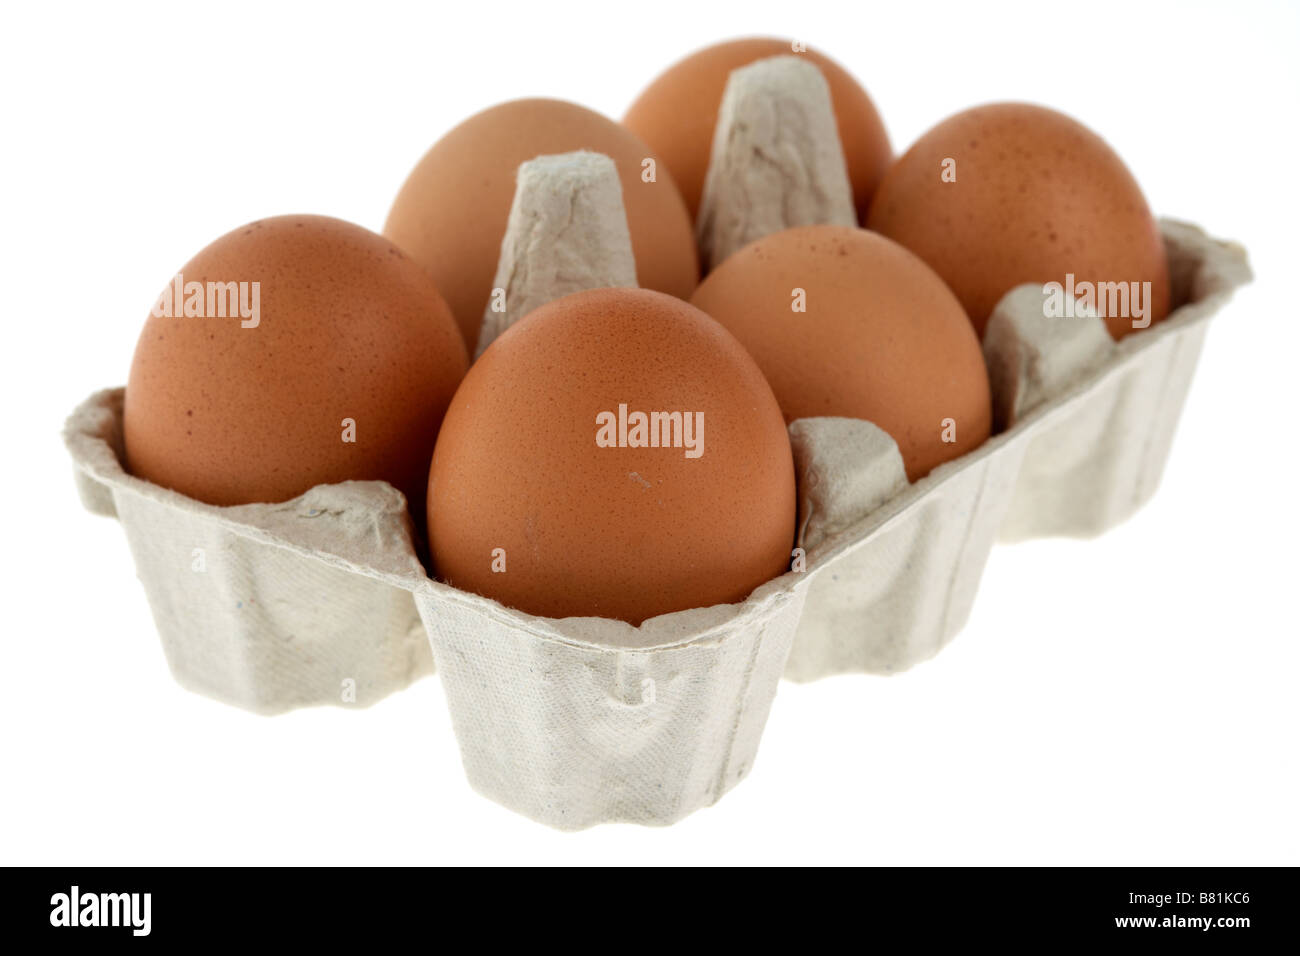 Six half dozen free range hens eggs collected in a recycled cardboard egg carton Stock Photo